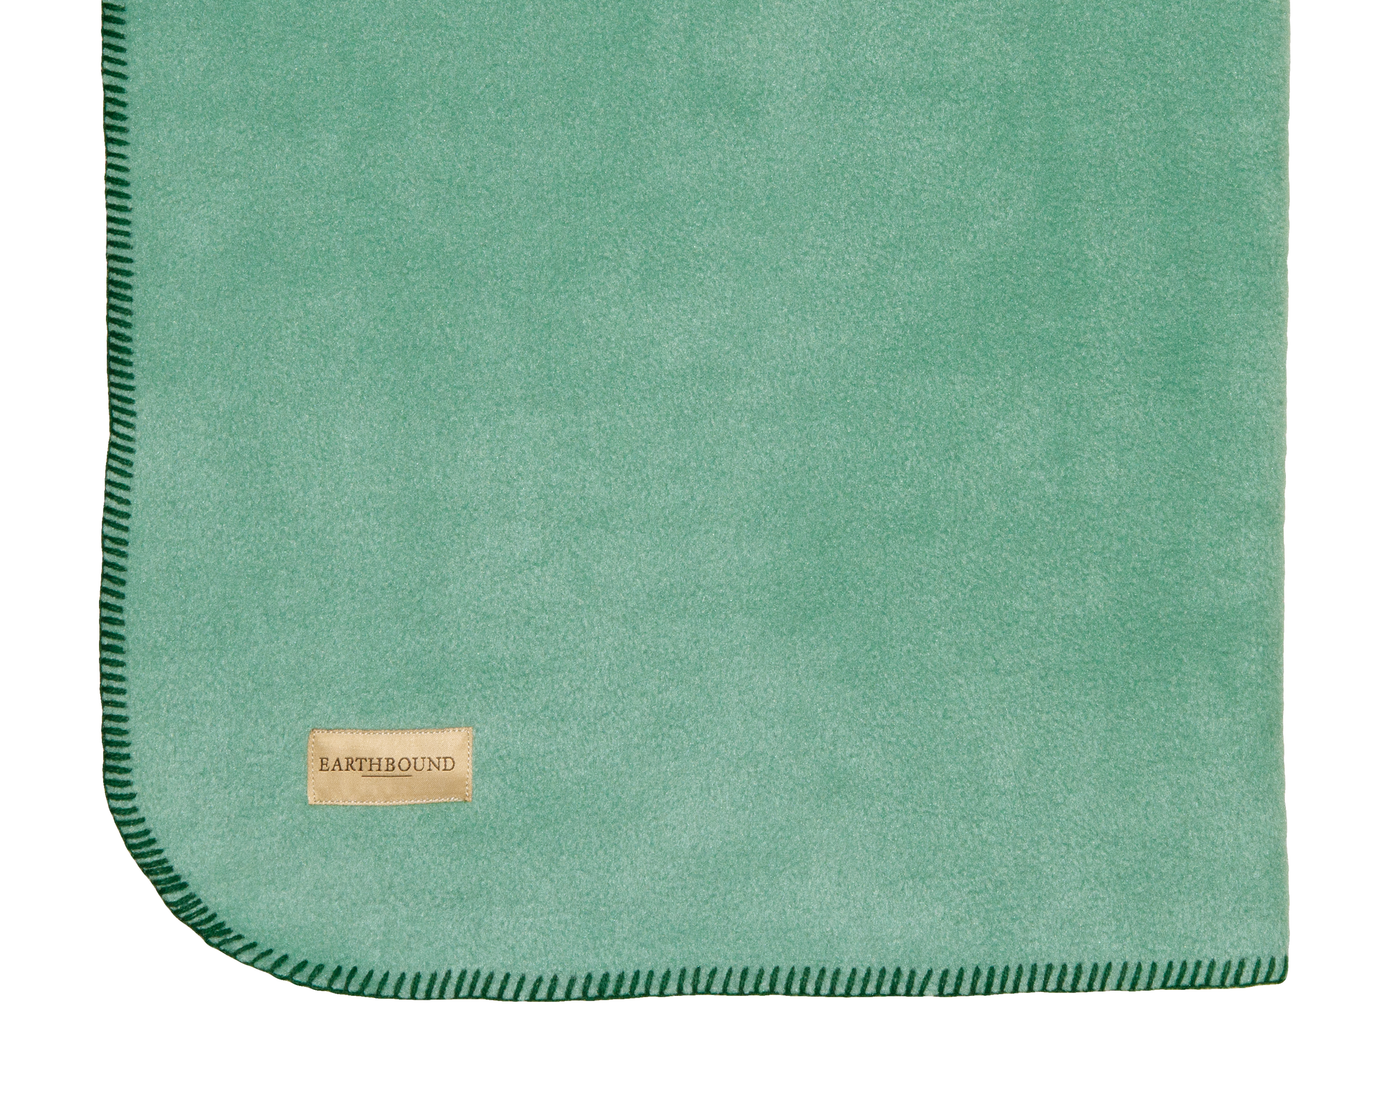 Close up of stitched fleece pet blanket in light green and green thread